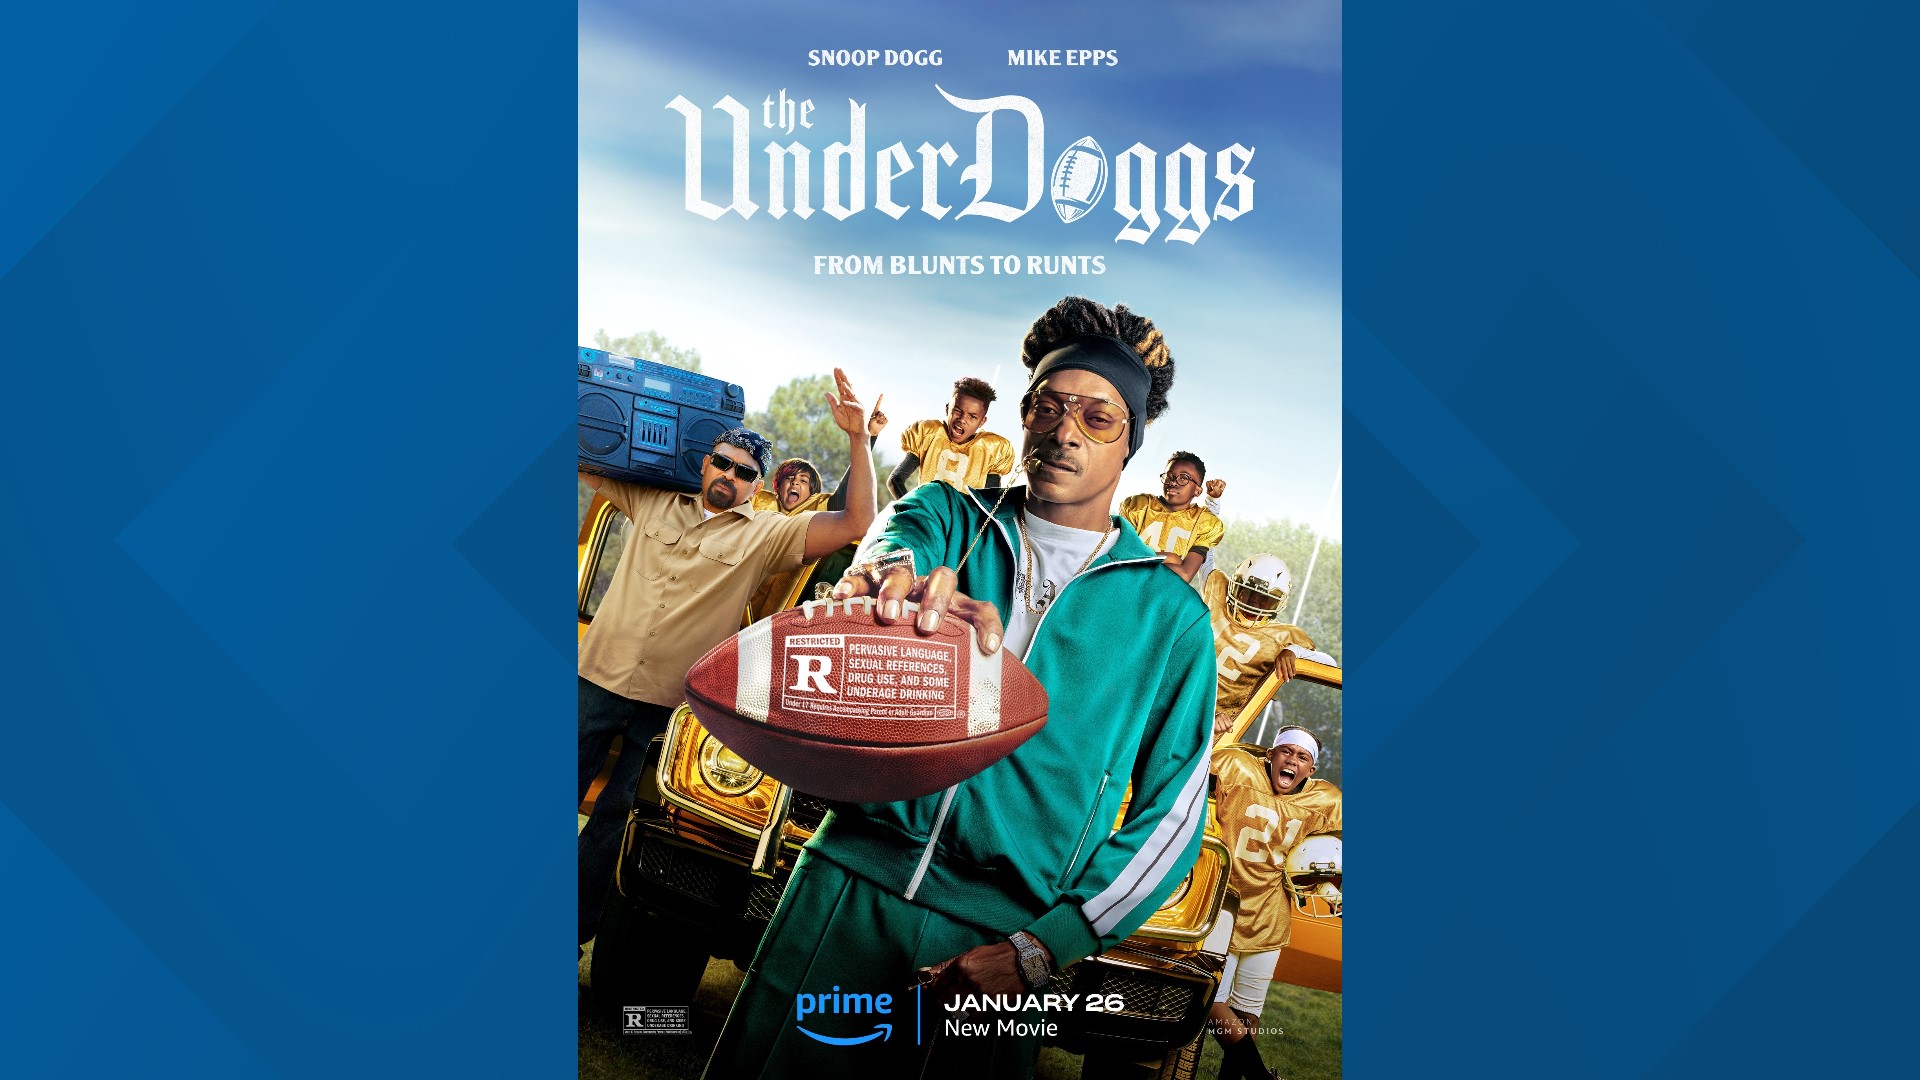 St. Louis boy stars in new Snoop Dogg movie 'The Underdoggs'